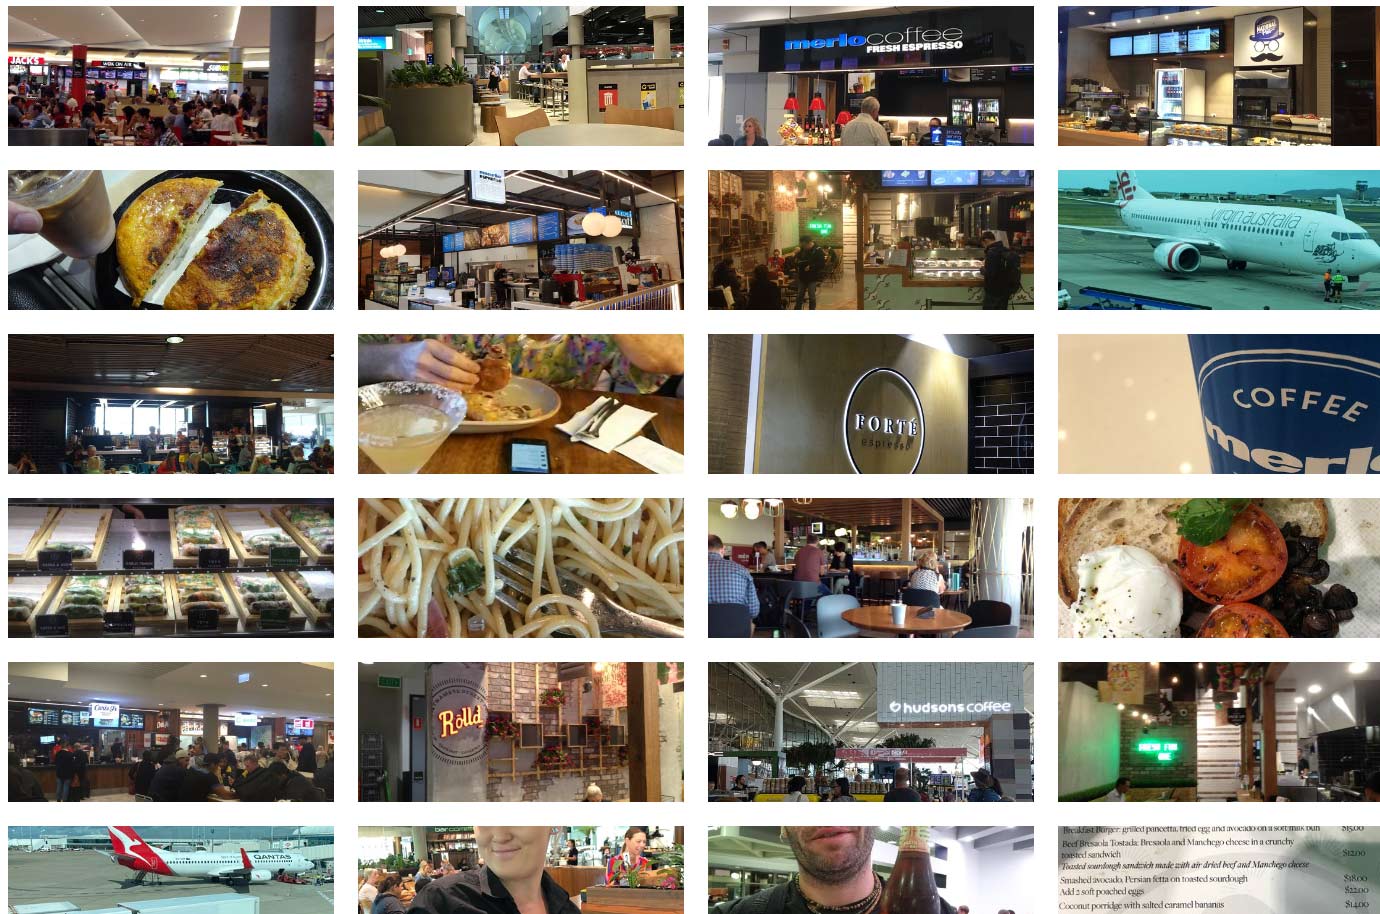 Restaurants, cafe bars and fast food services of Brisbane Airport